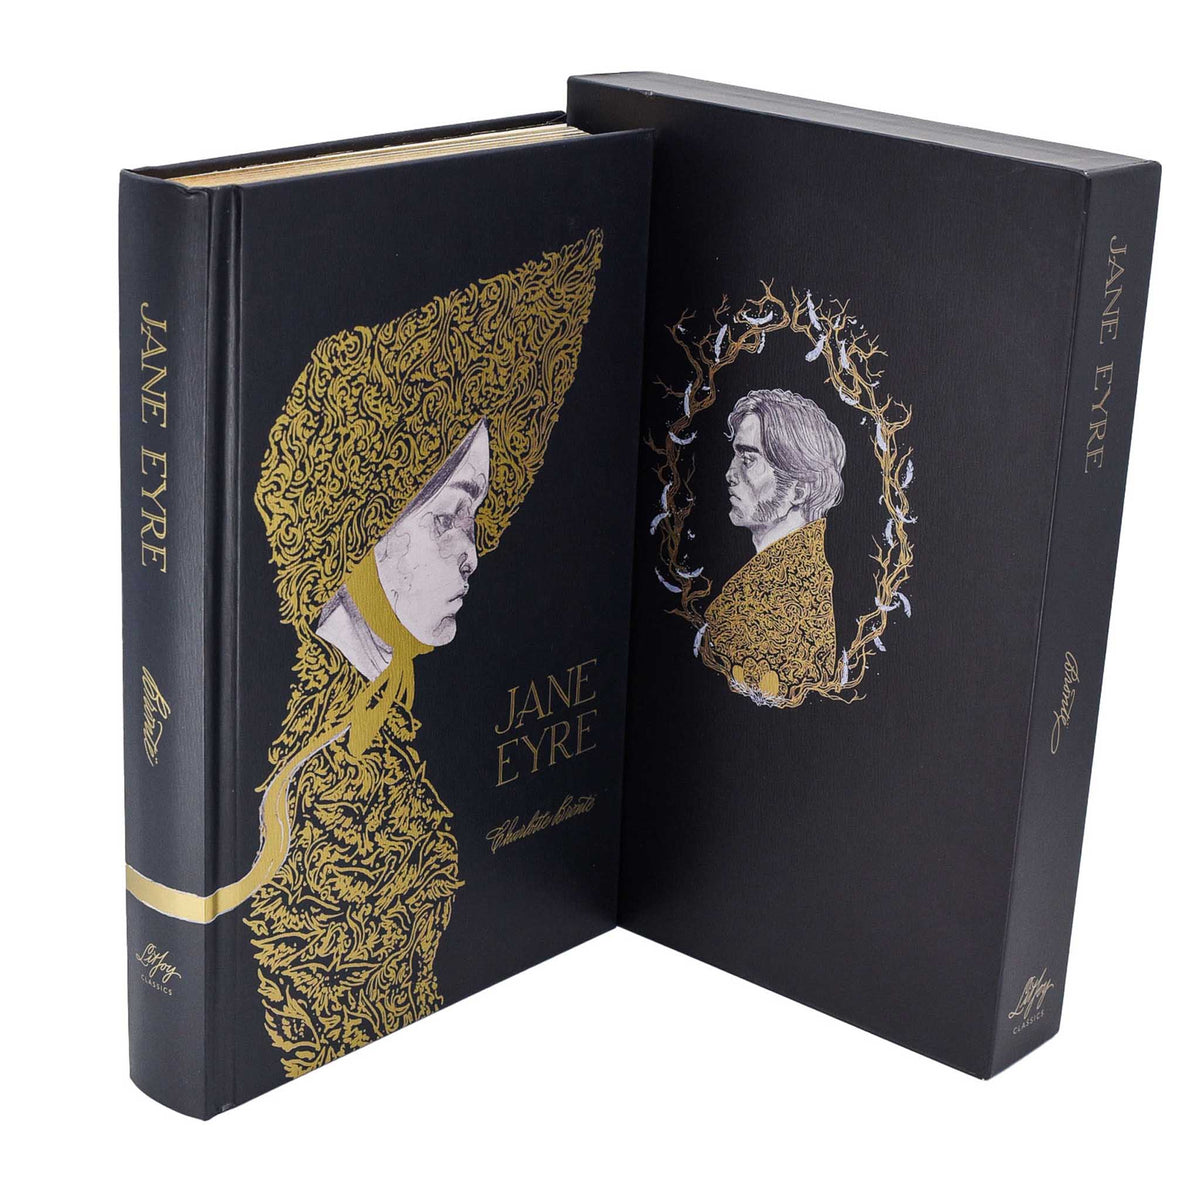 Jane Eyre by Charlotte Bronte hardcover special edition book with black cover and gold portraits of Jane and Mr. Rochester